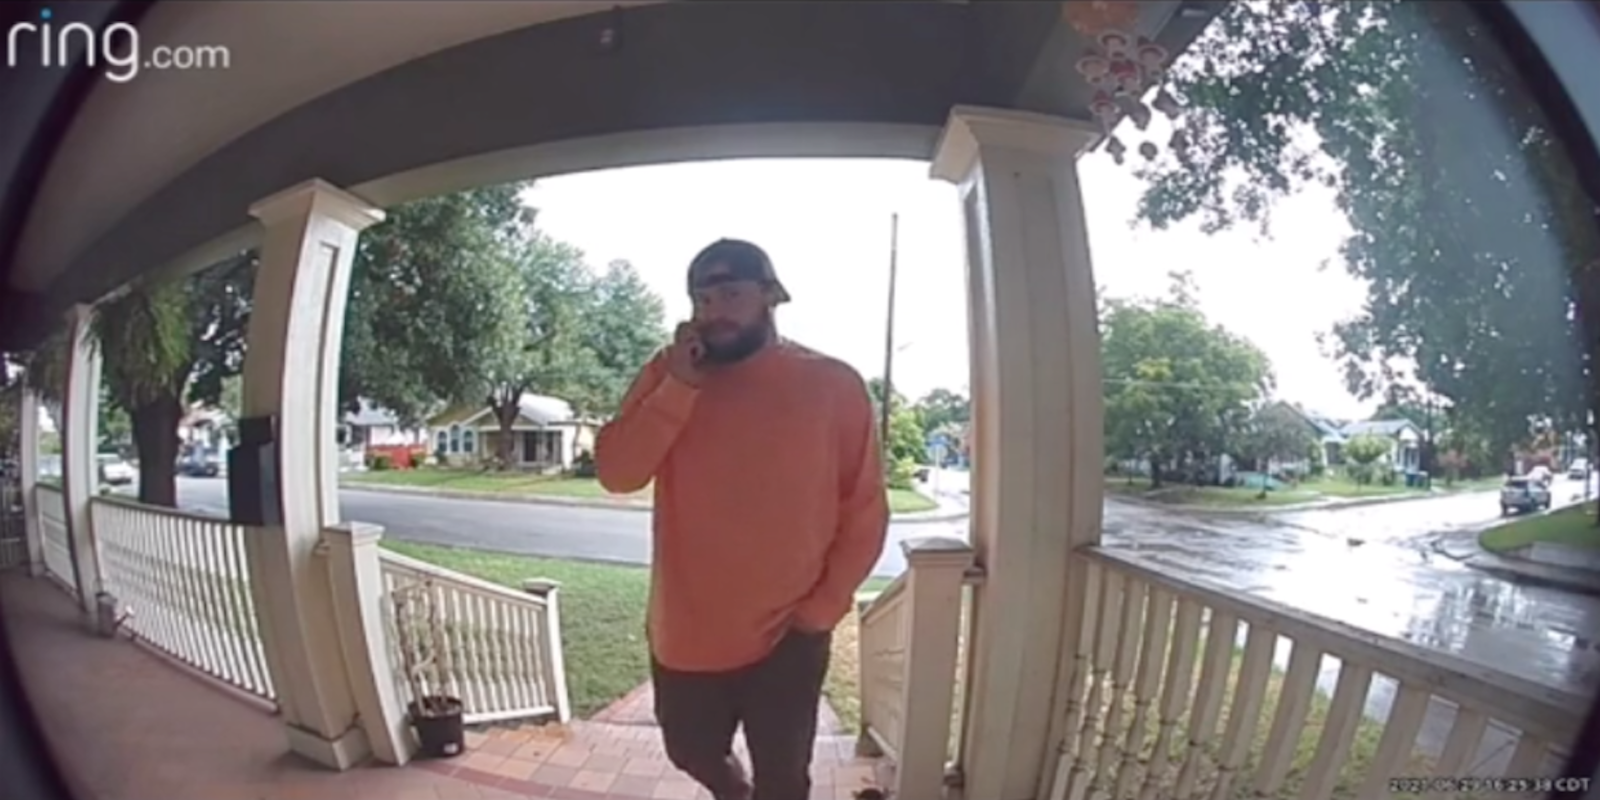 Ring doorbell camera screenshot of man walking up to porch of father in law's house as he calls him a 'dickhead'